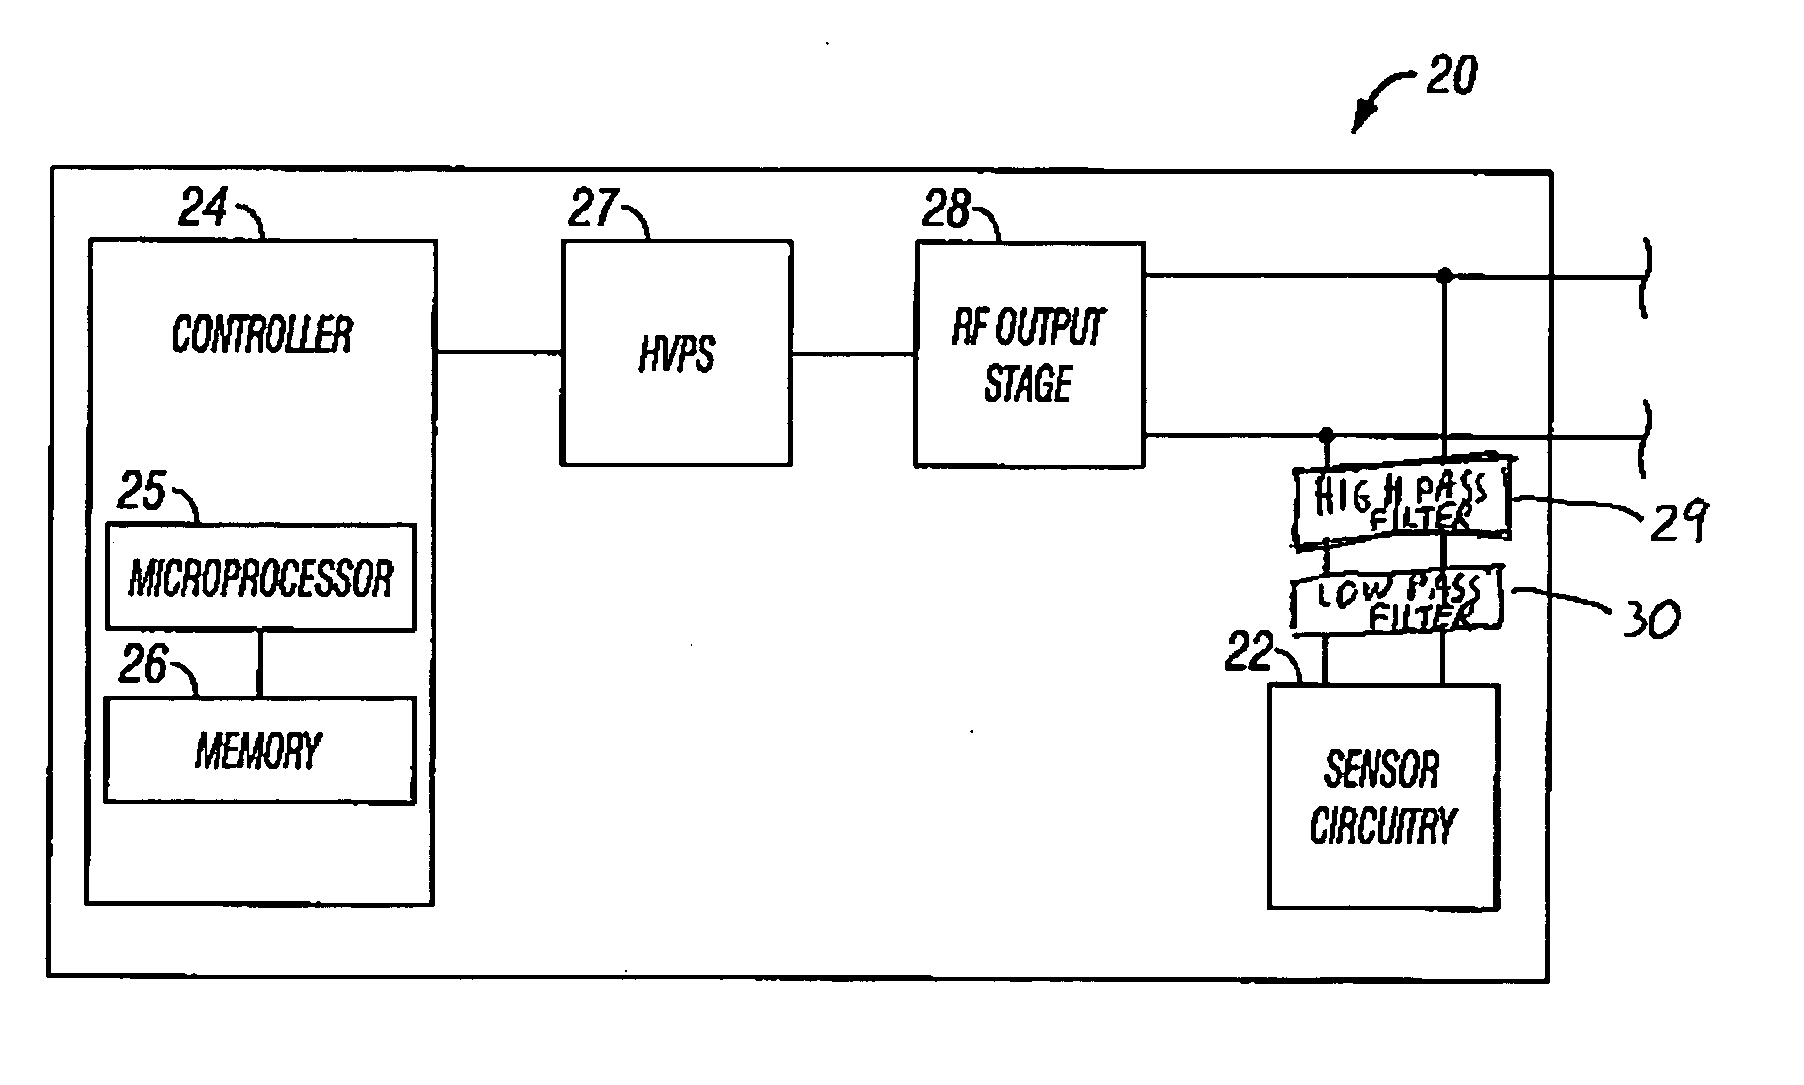 Arc based adaptive control system for an electrosurgical unit